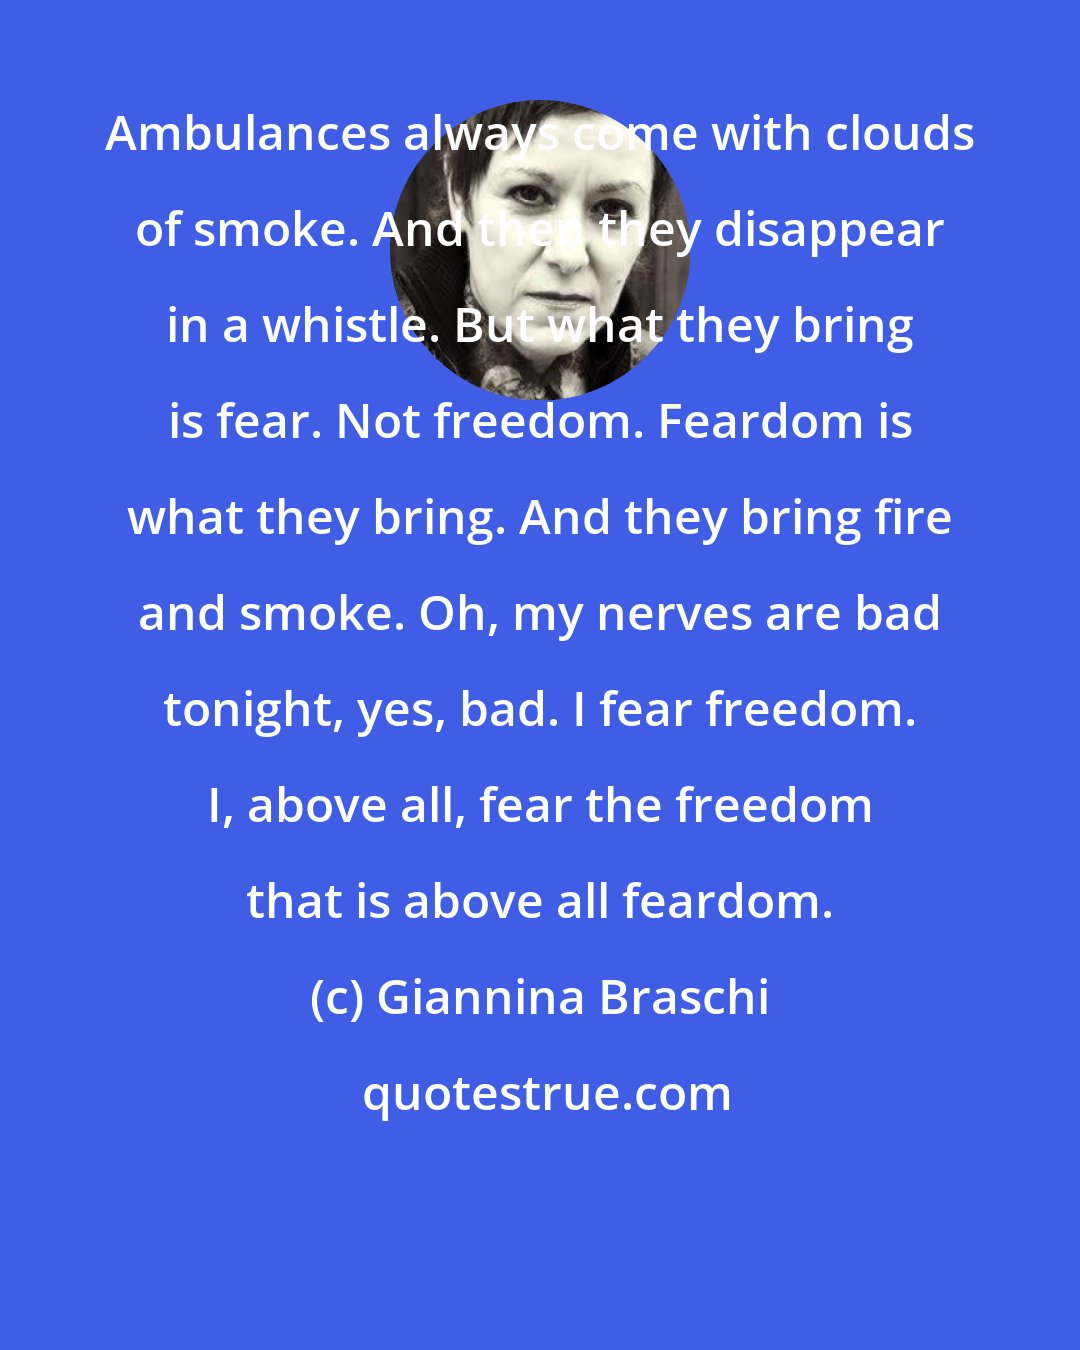 Giannina Braschi: Ambulances always come with clouds of smoke. And then they disappear in a whistle. But what they bring is fear. Not freedom. Feardom is what they bring. And they bring fire and smoke. Oh, my nerves are bad tonight, yes, bad. I fear freedom. I, above all, fear the freedom that is above all feardom.